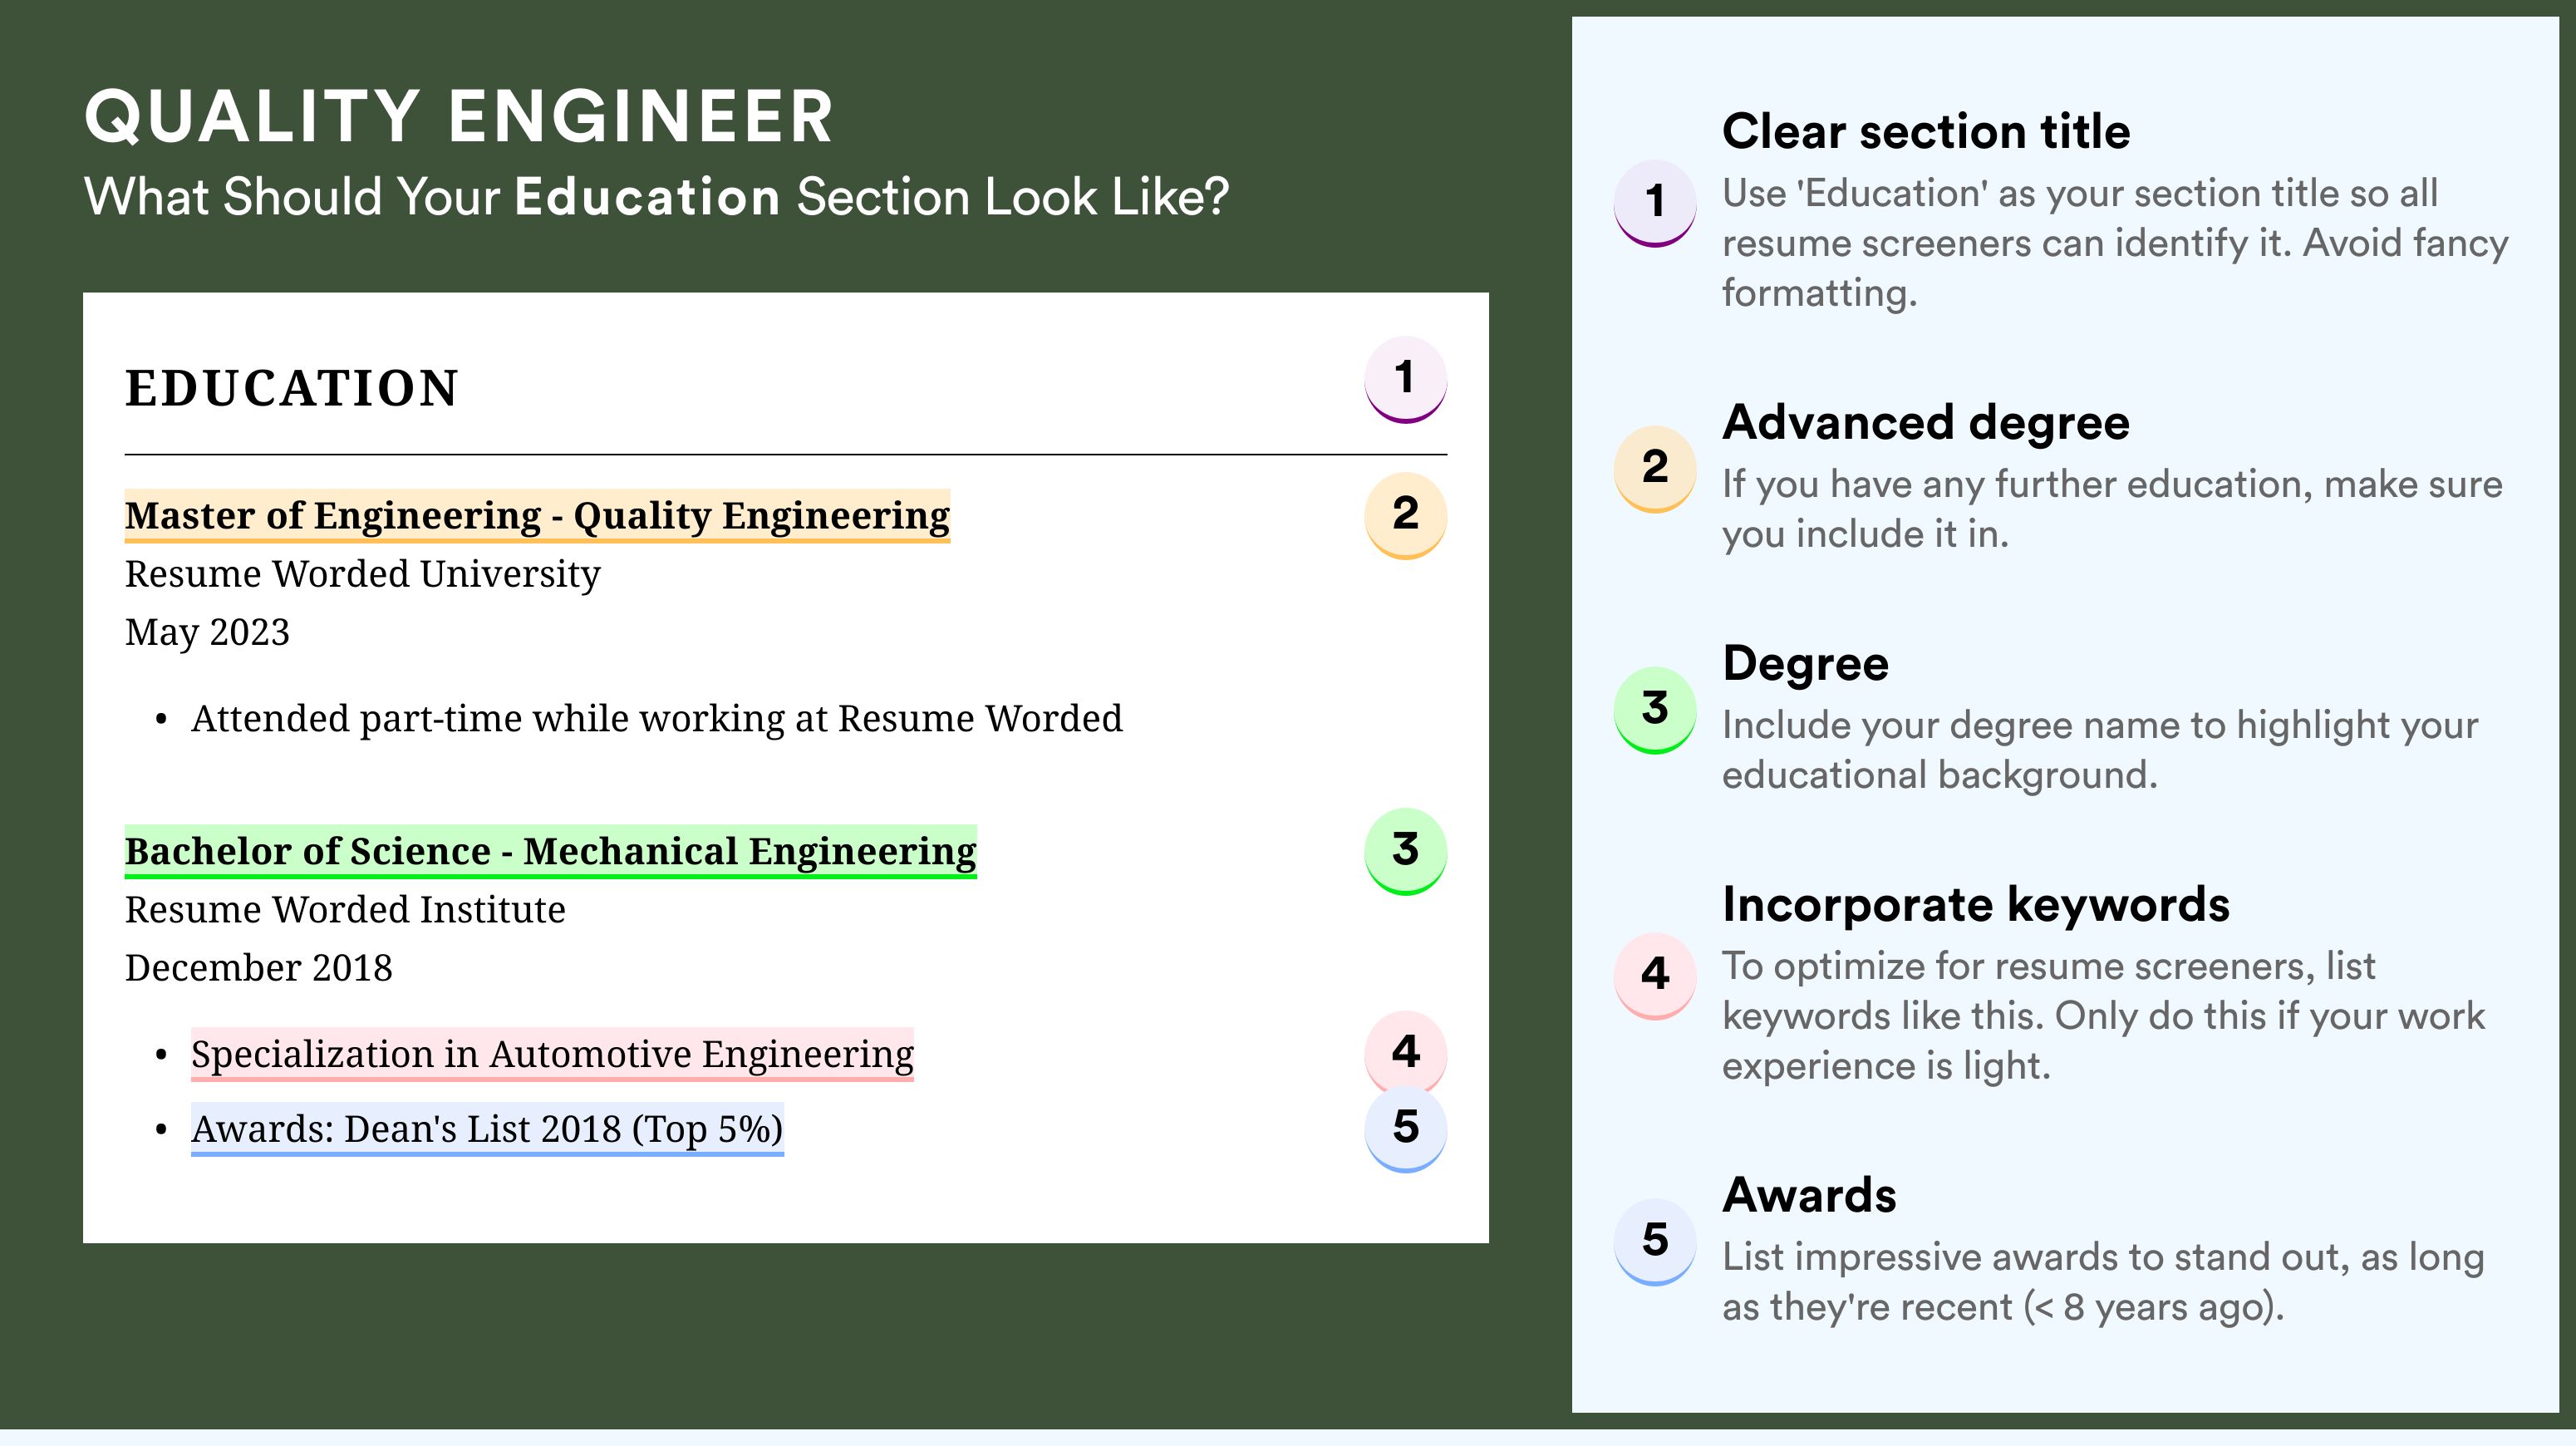 How To Write An Education Section - Quality Engineer Roles